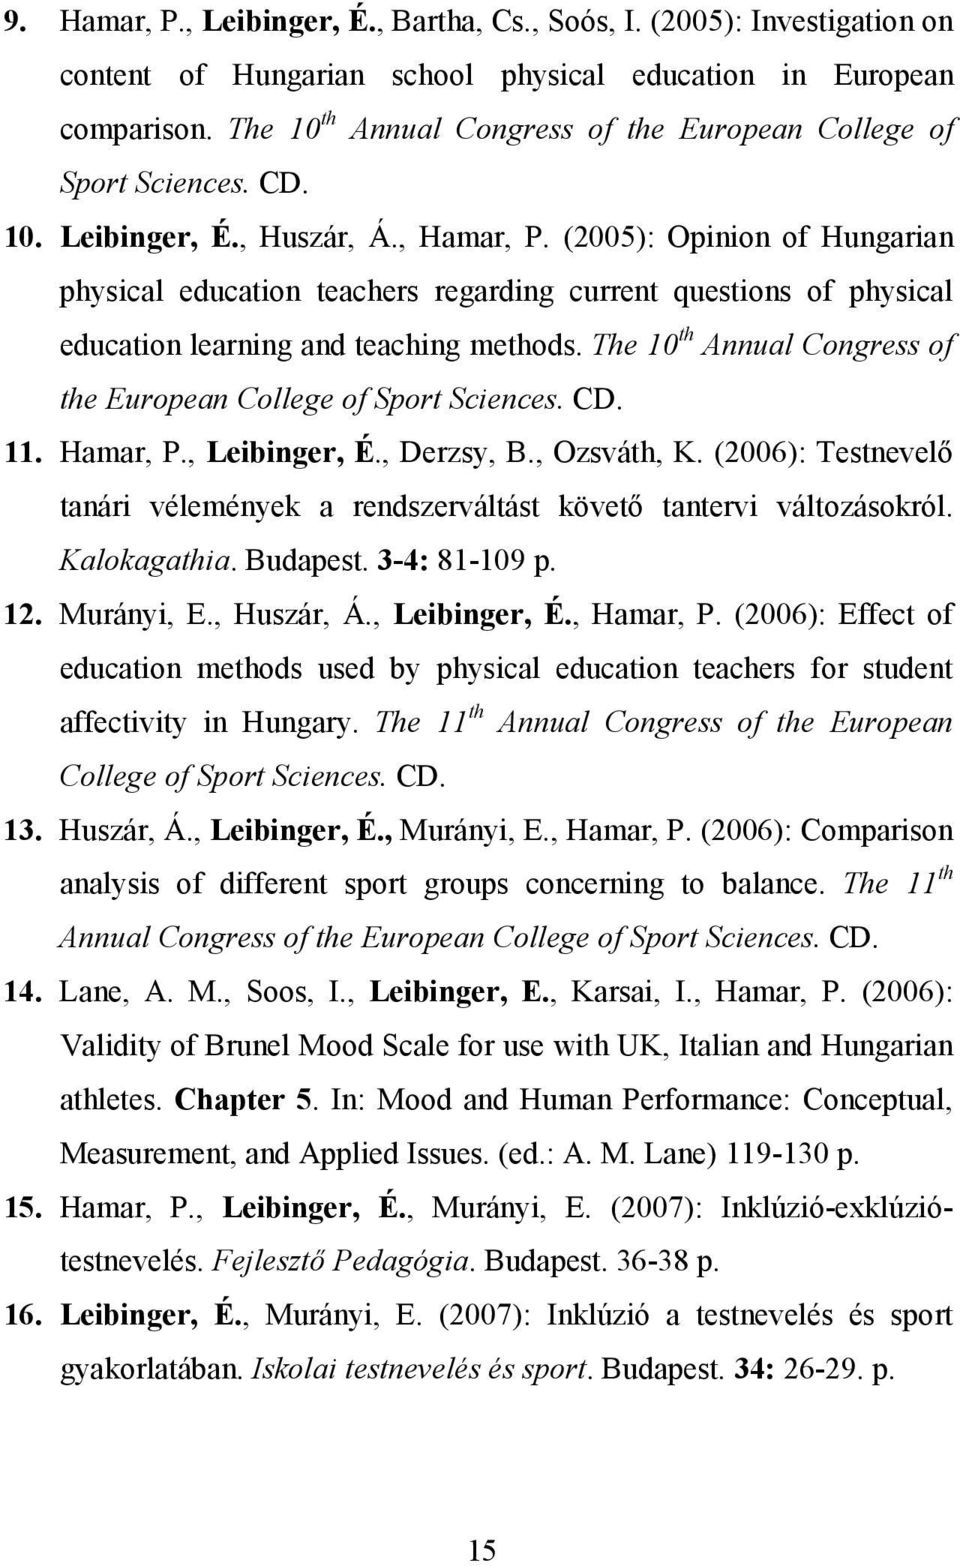 (2005): Opinion of Hungarian physical education teachers regarding current questions of physical education learning and teaching methods.